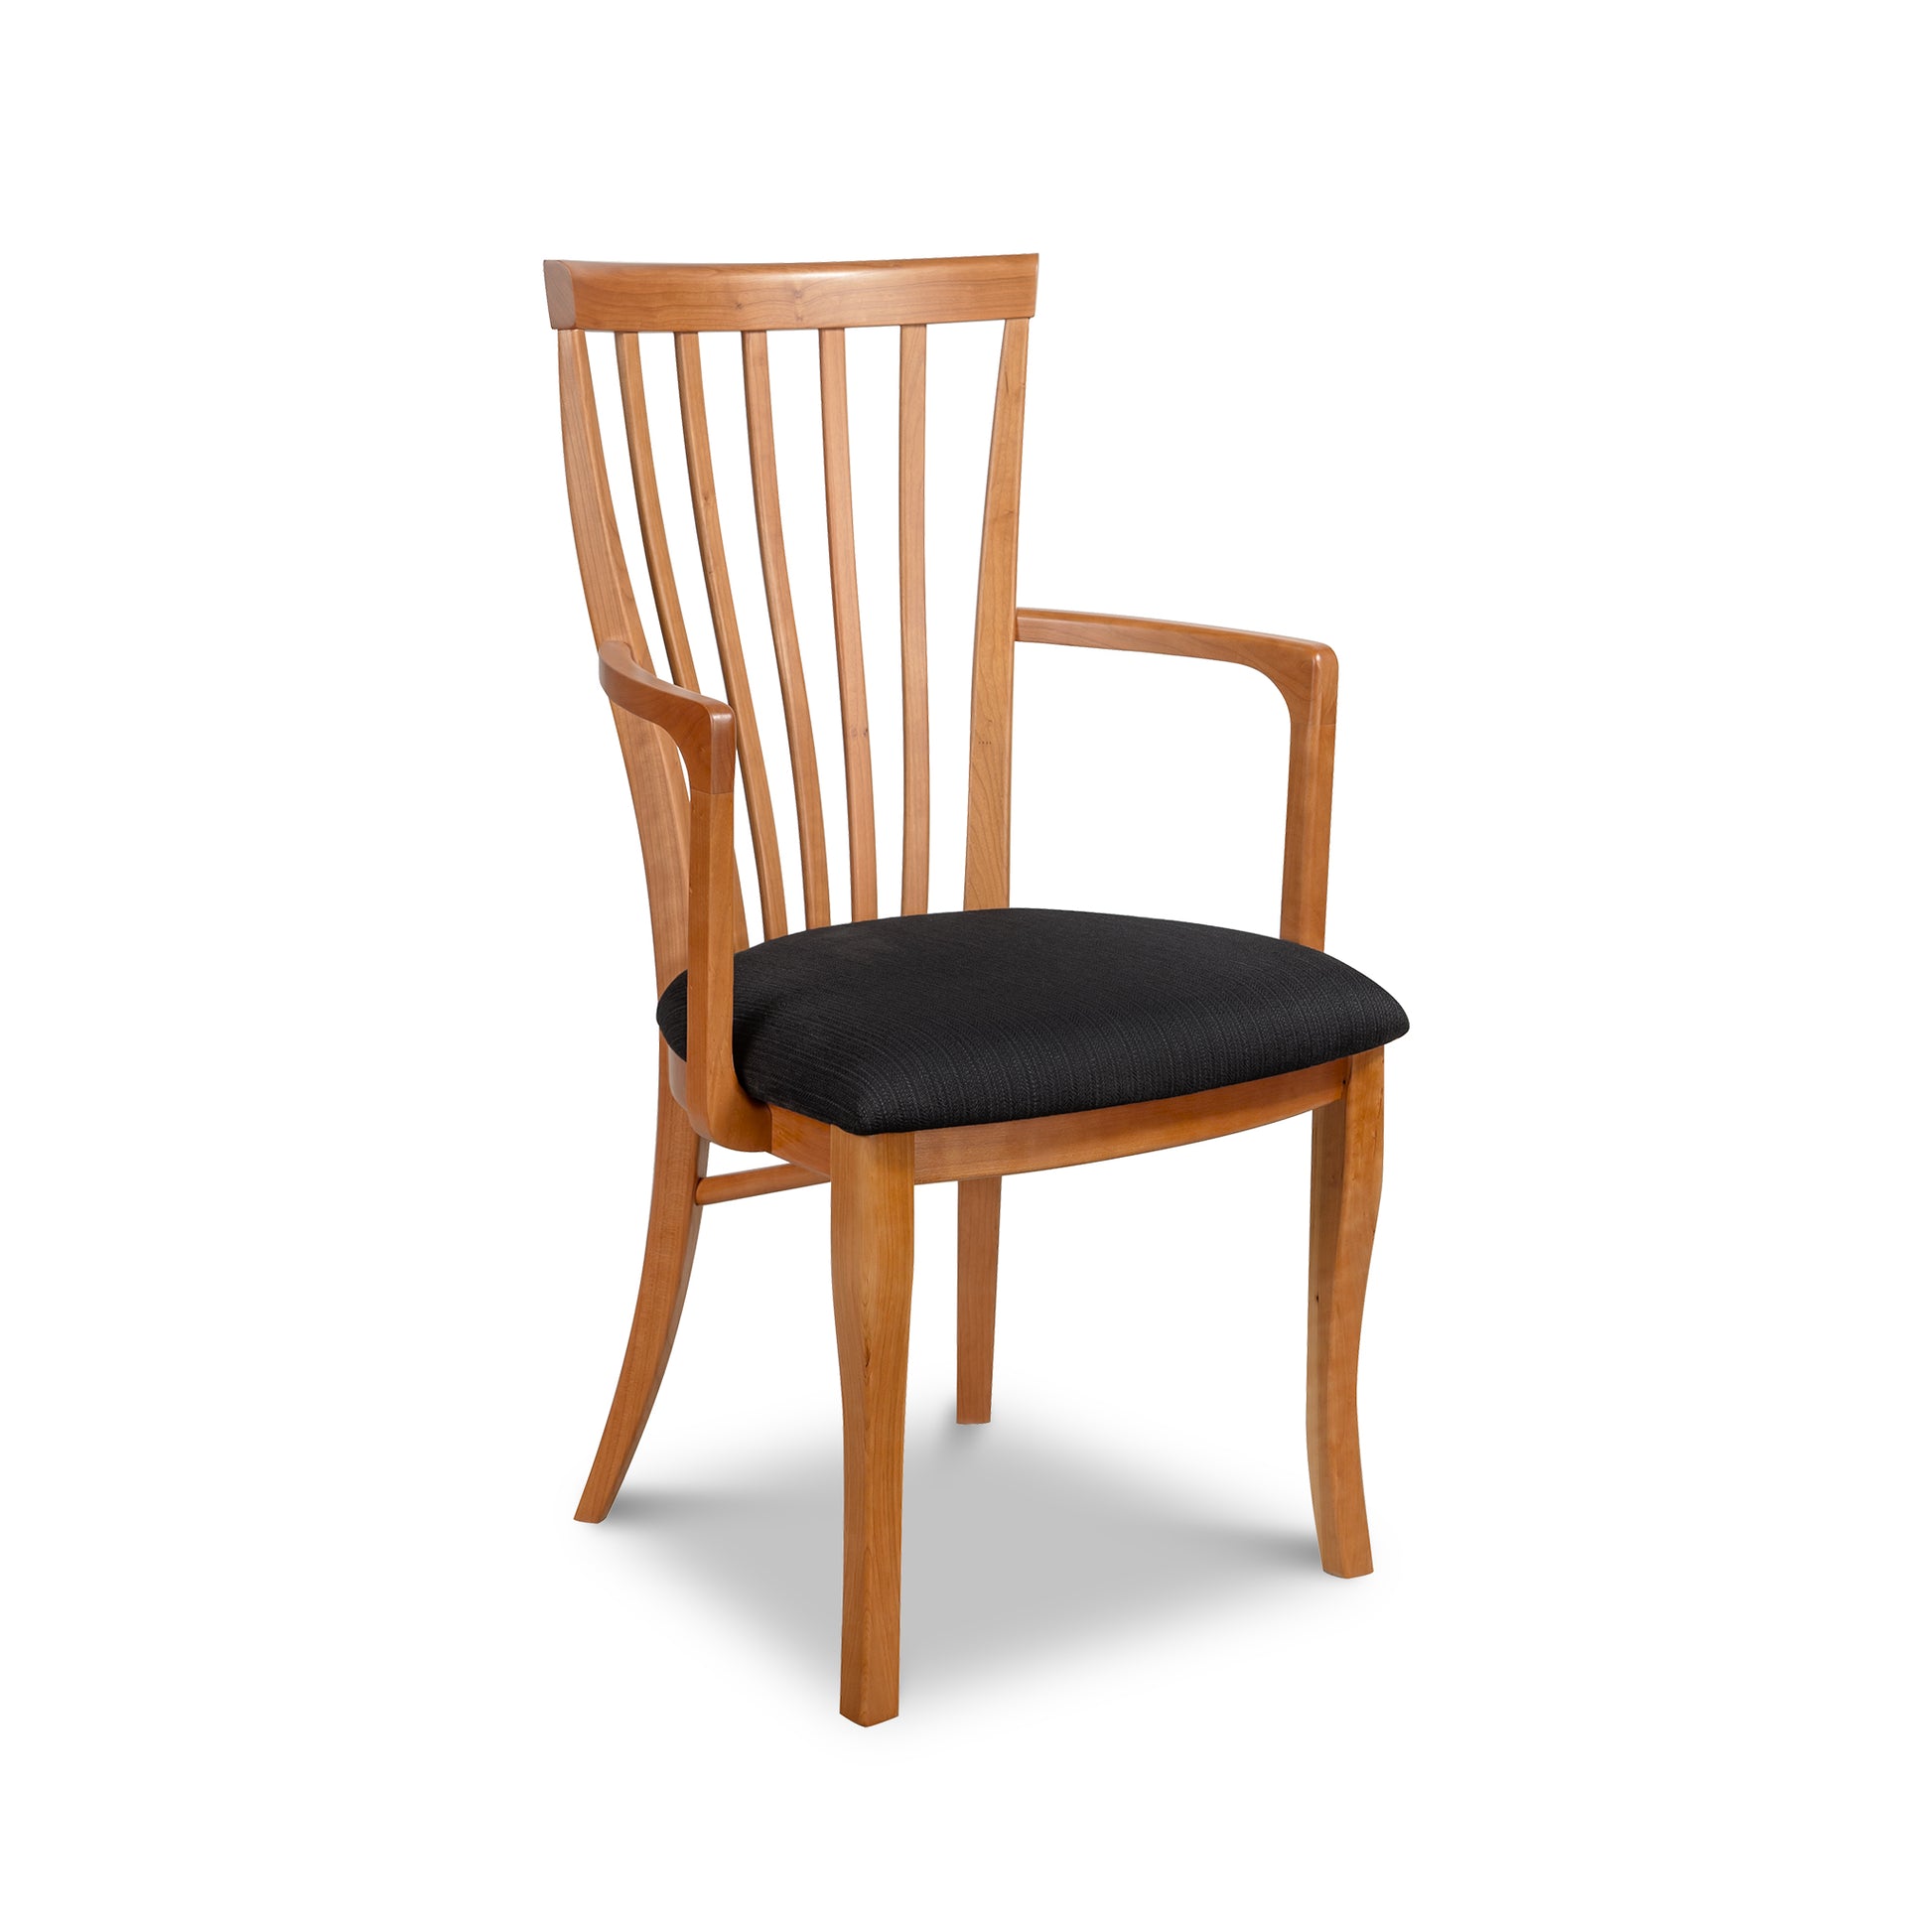 A comfortable Lyndon Furniture Classic Shaker Chair #1 with a black upholstered seat.